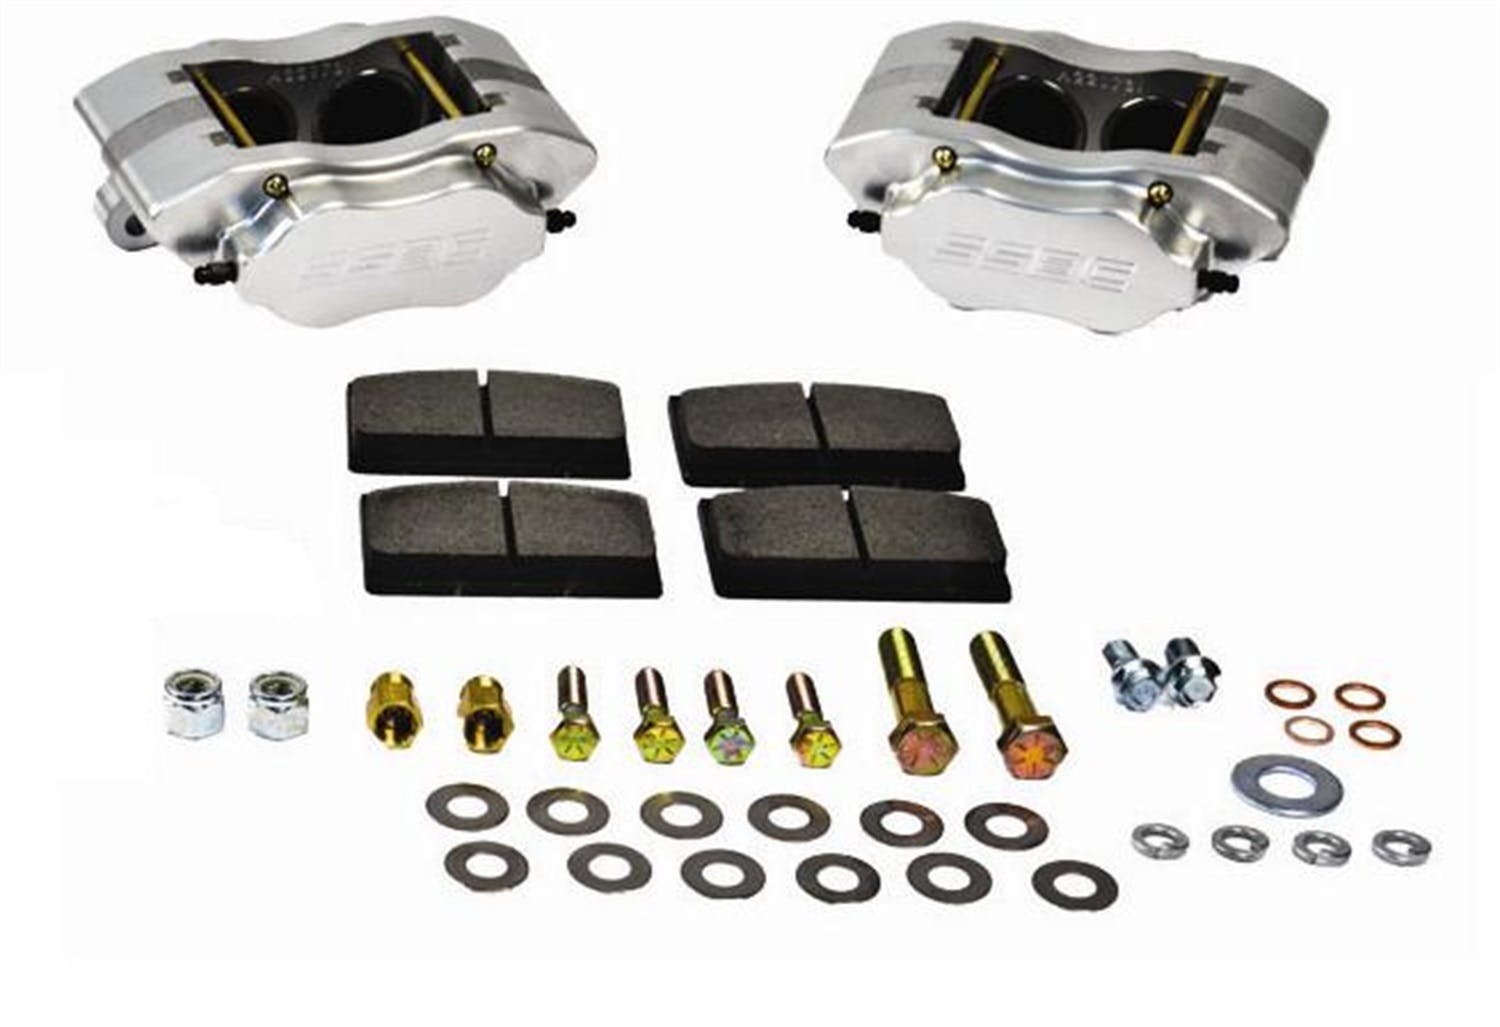 Stainless Steel Brakes A198-1BK Q/C Comp S A198-1 kit w/black calipers